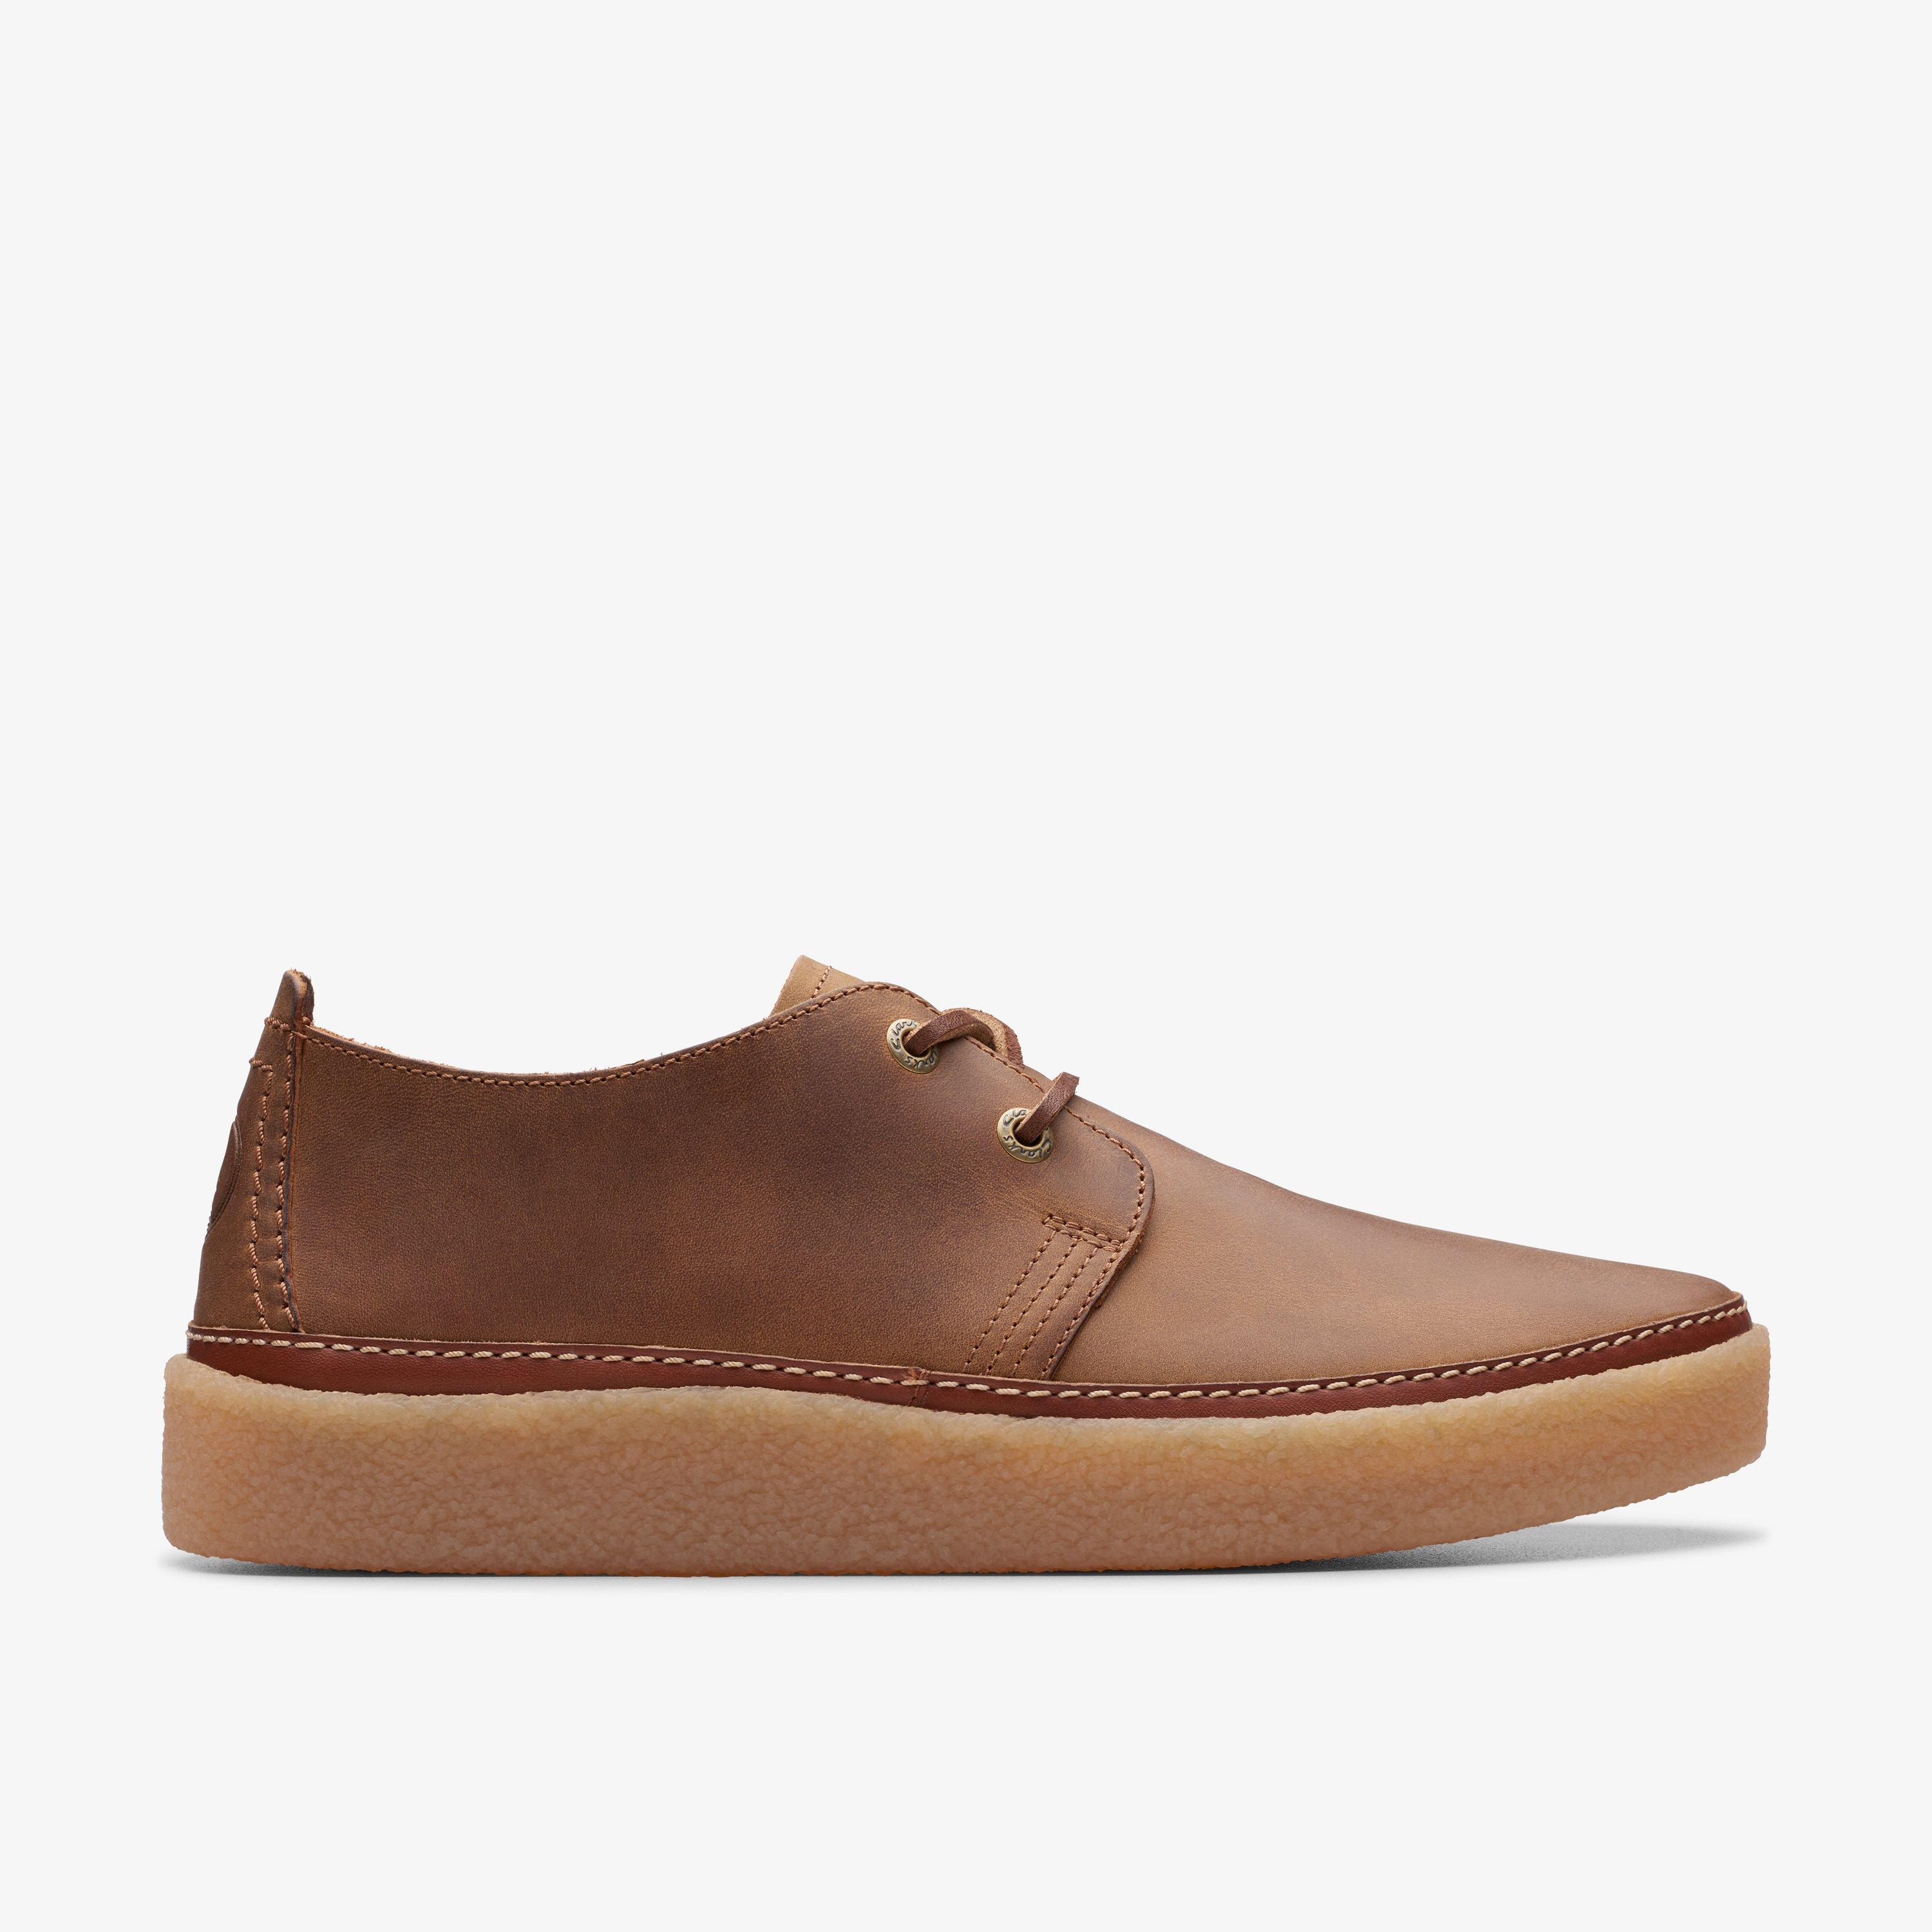 Mens Clarkwood Low Beeswax Leather Shoes | Clarks IE